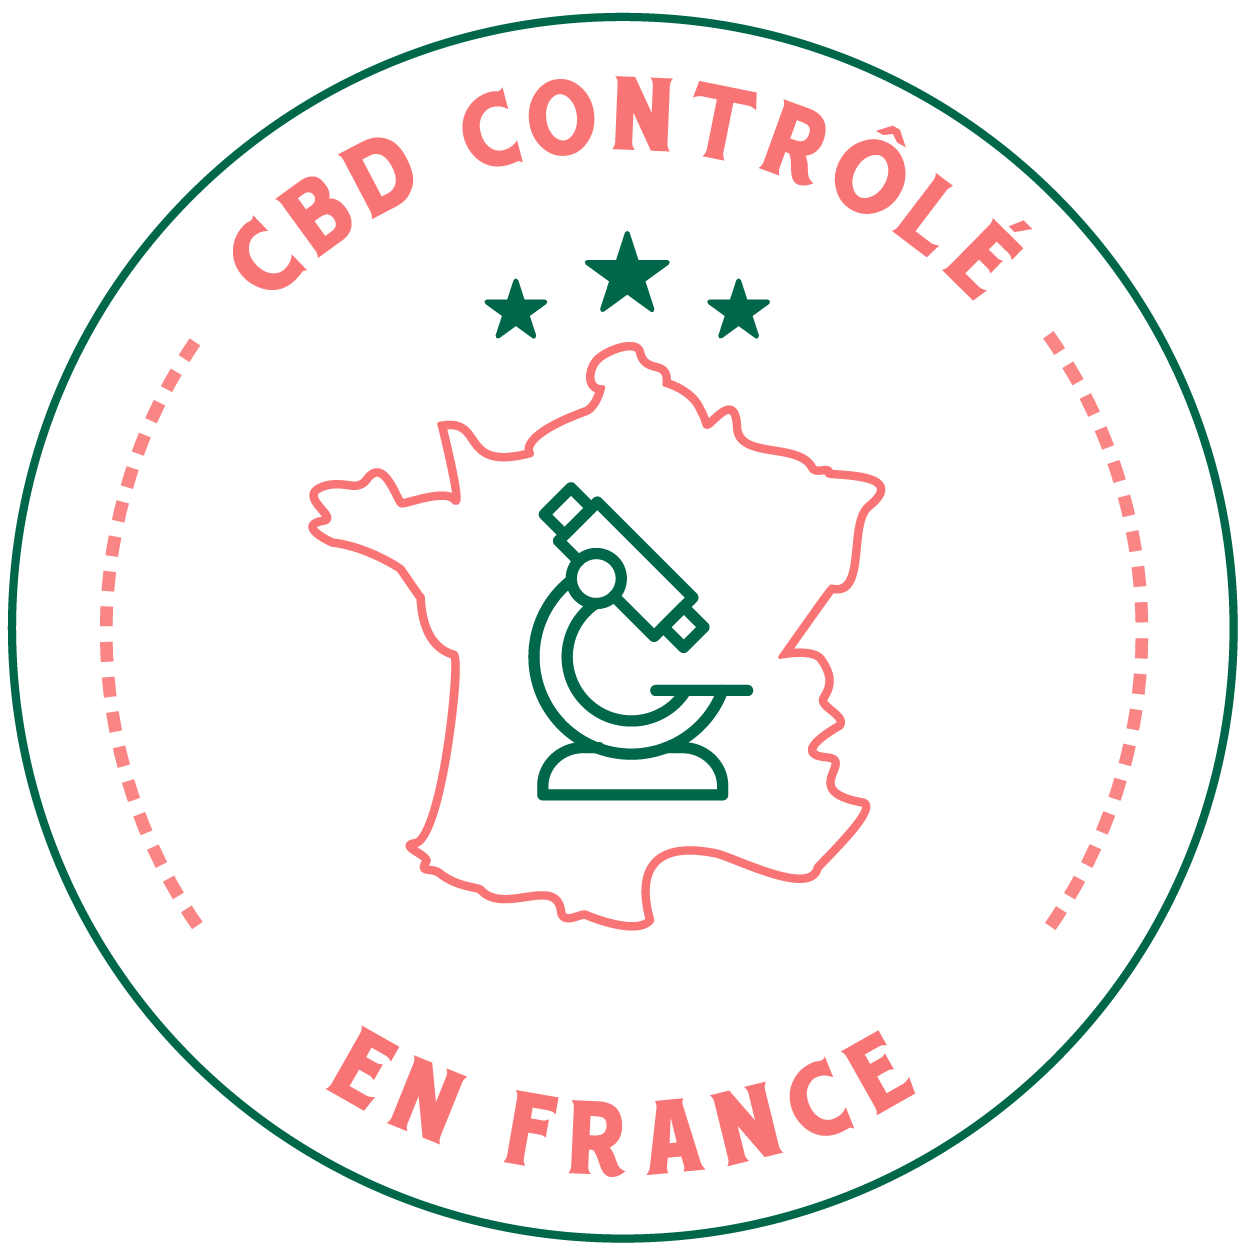 CBD controlled in France